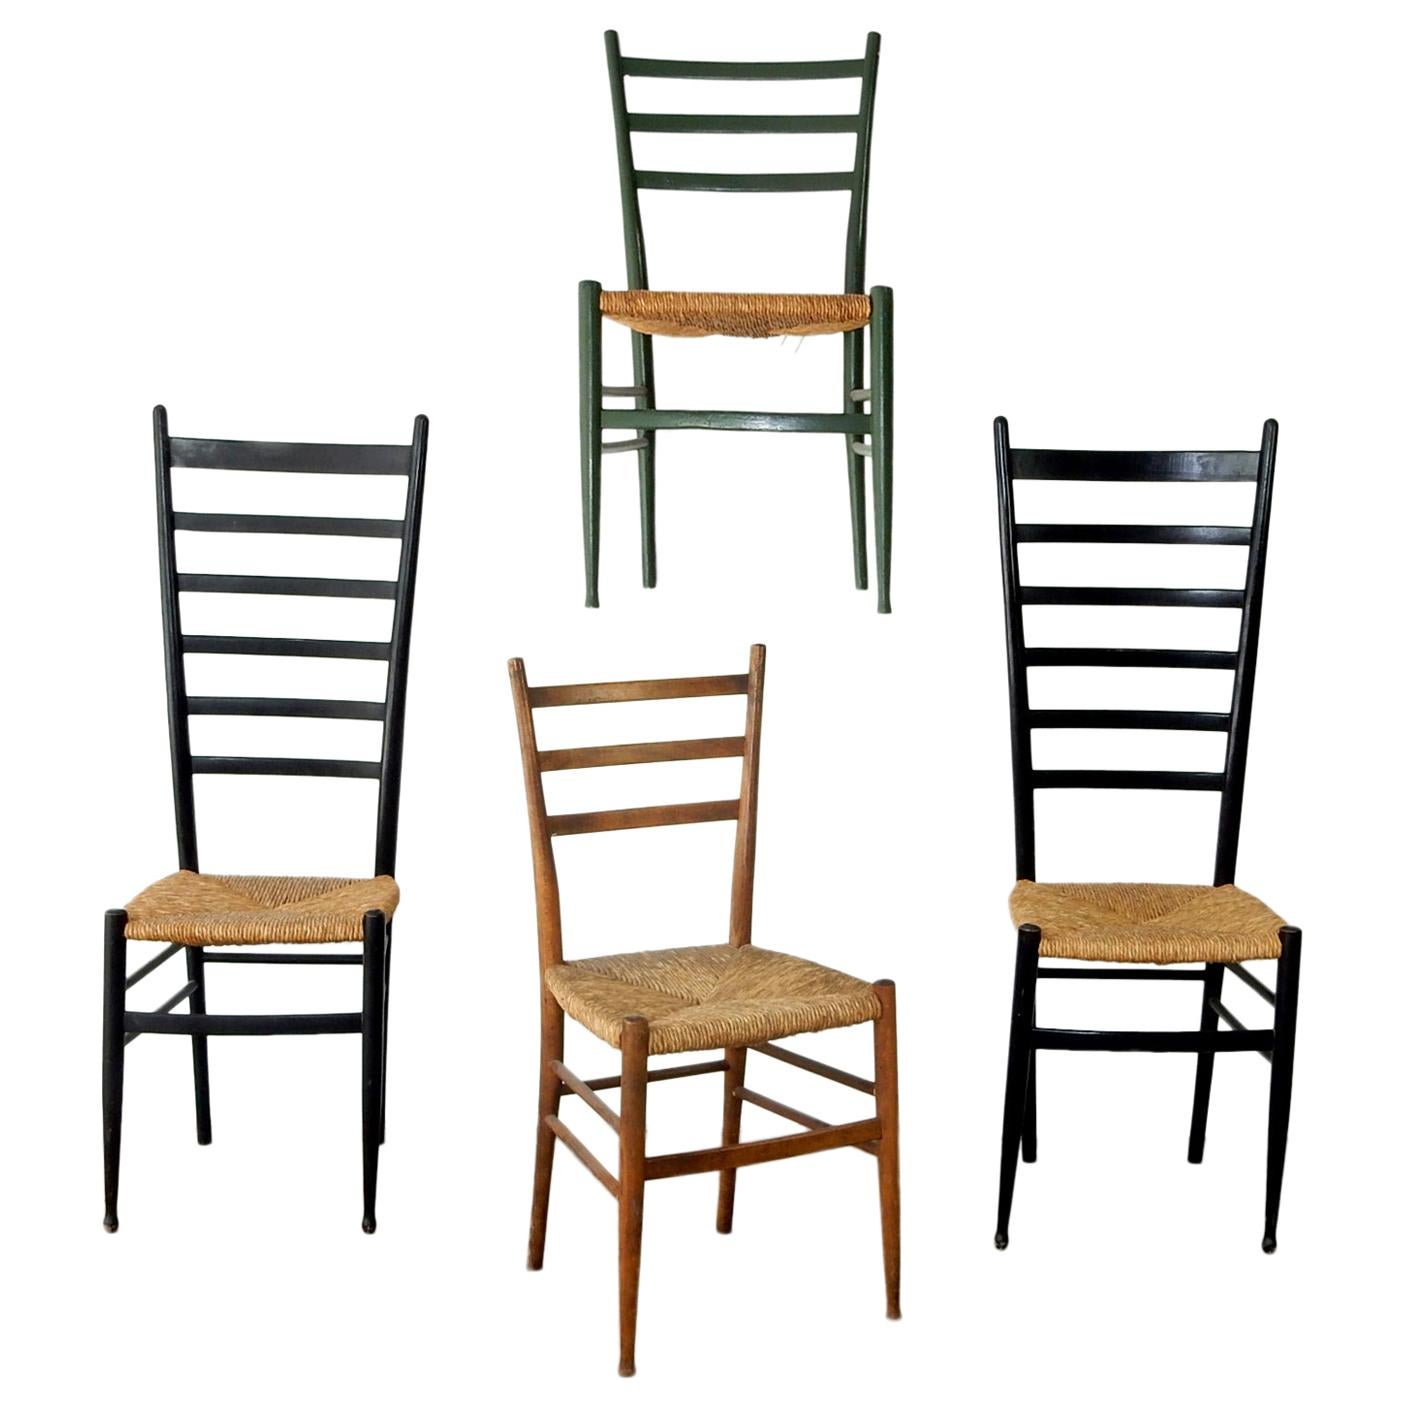 Vintage Italian Ladder Back Chairs with Rush Seating